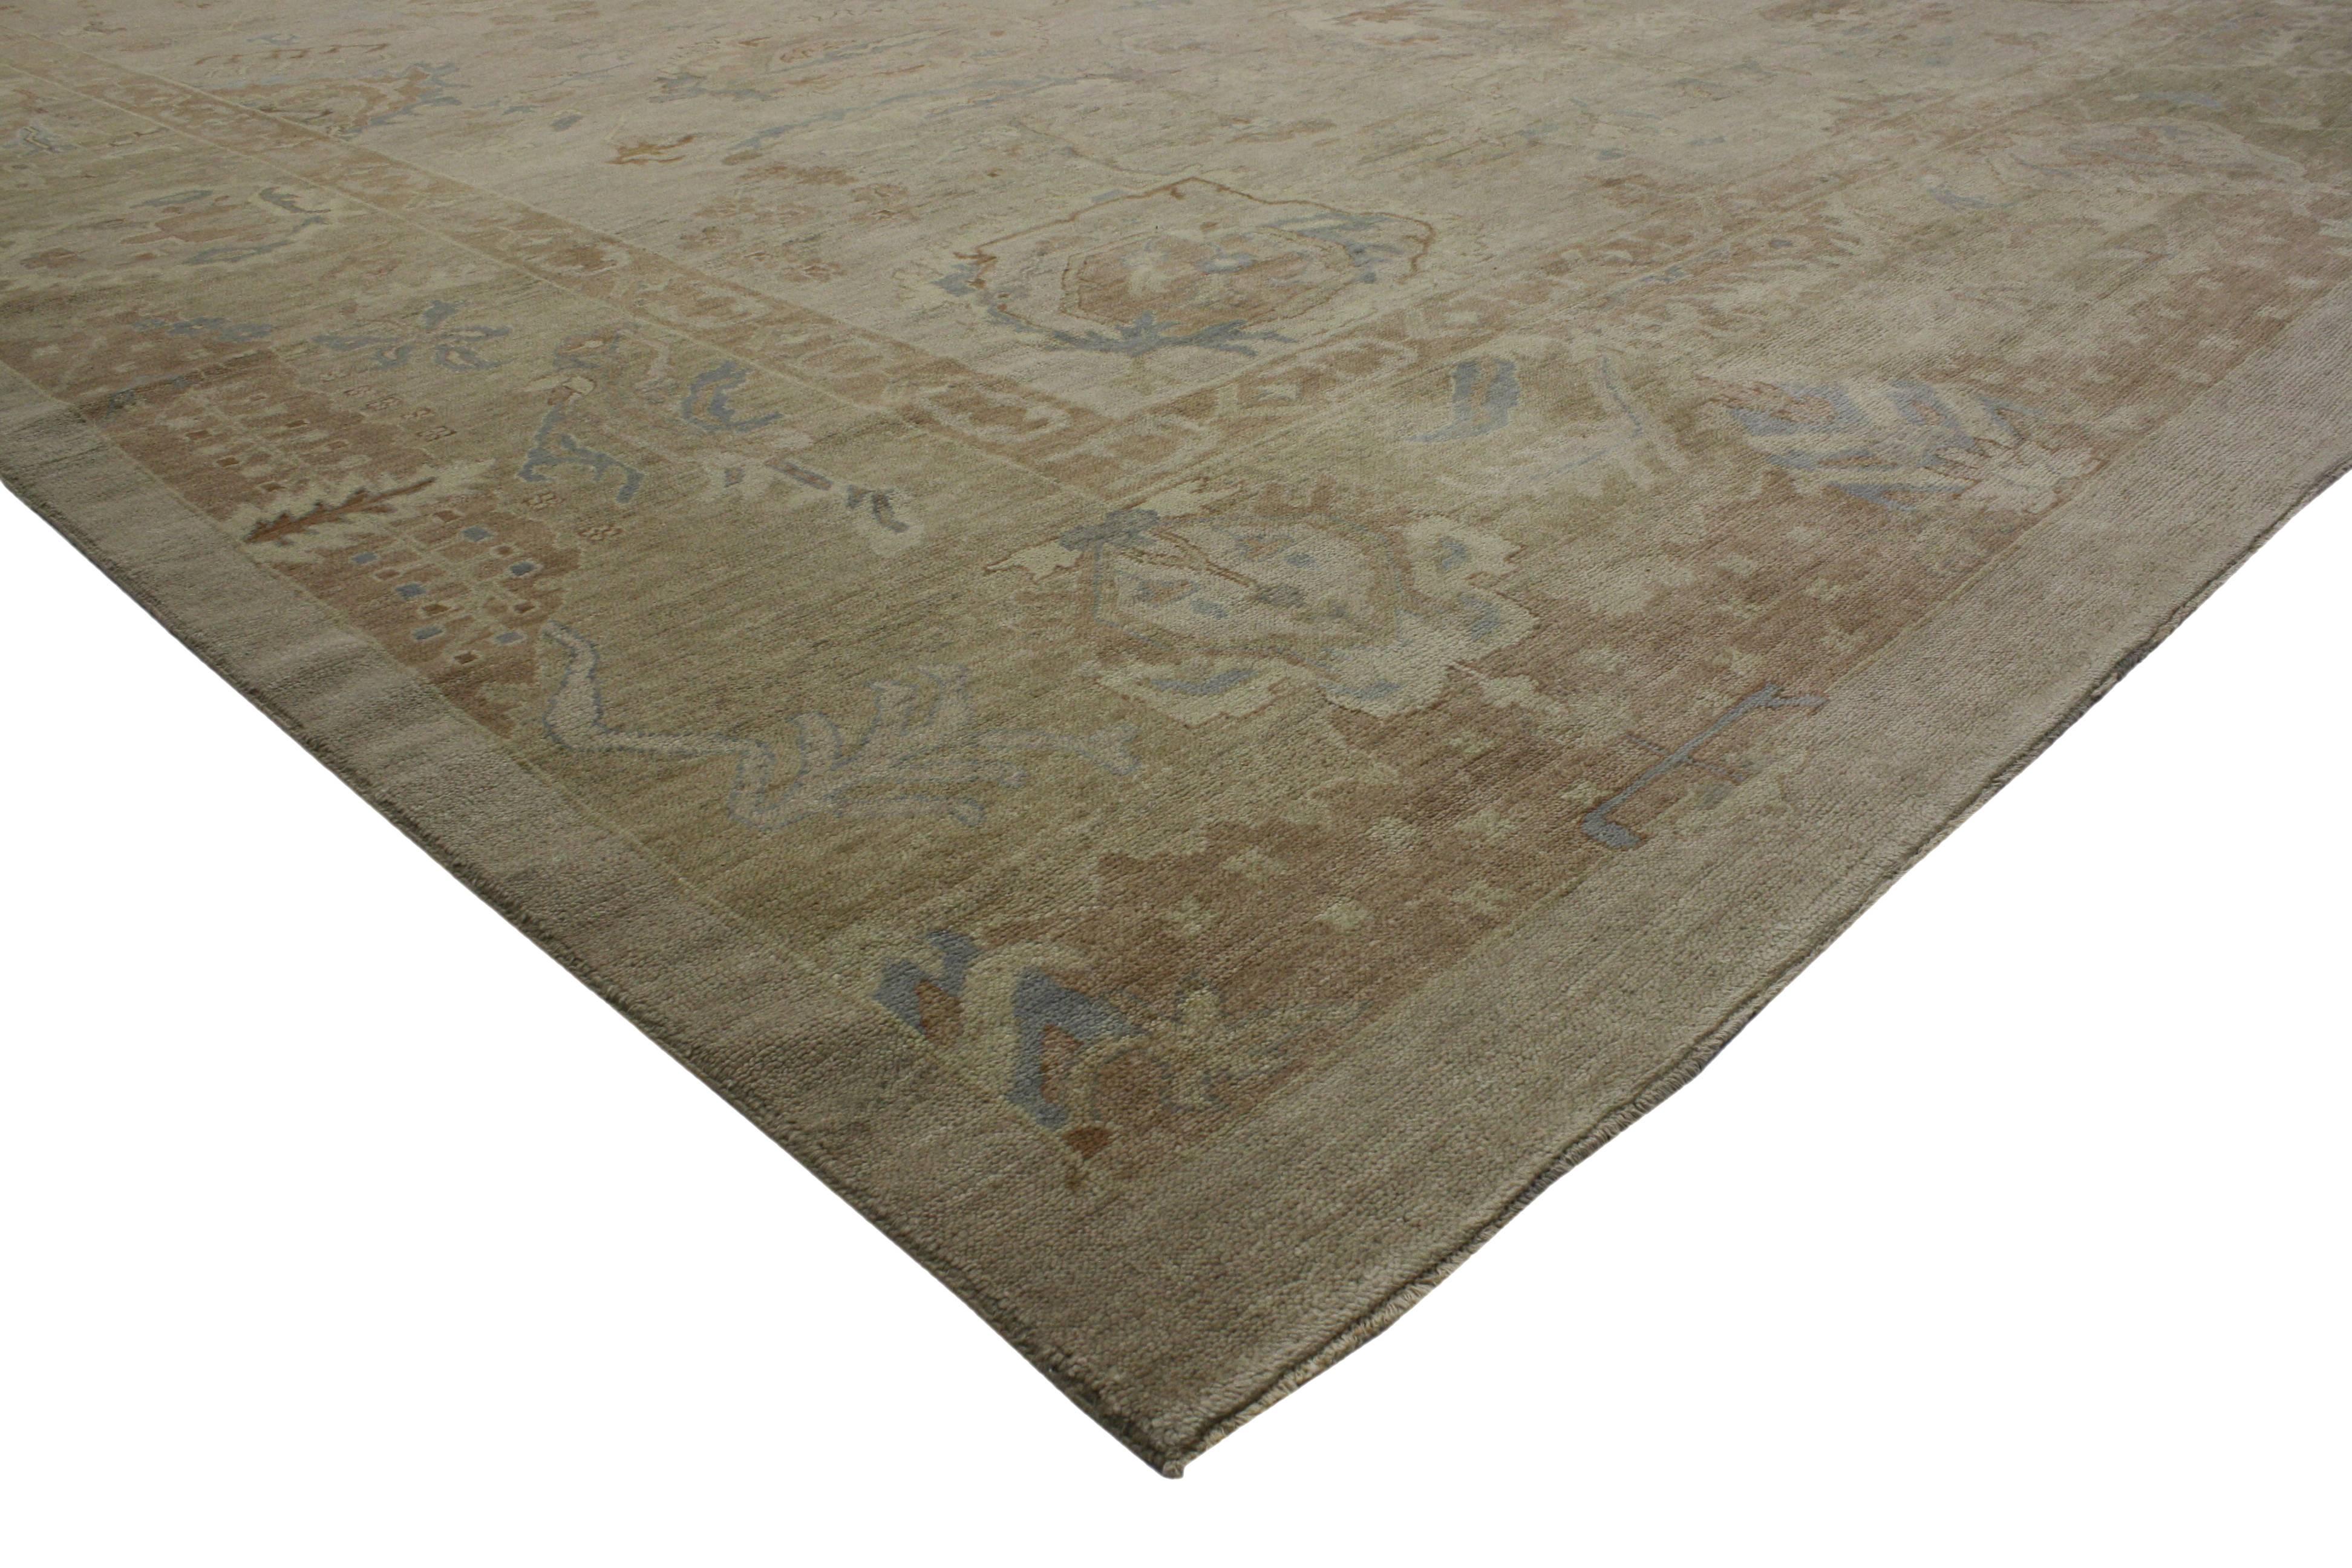 From casual elegance to fresh and formal, relish the refinement as this modern Oushak style rug in neutral colors evoke an air of warmth and comfort with its timeless aesthetic. Rendered in an earth-tone color palette of brown, khaki, ecru, sand,